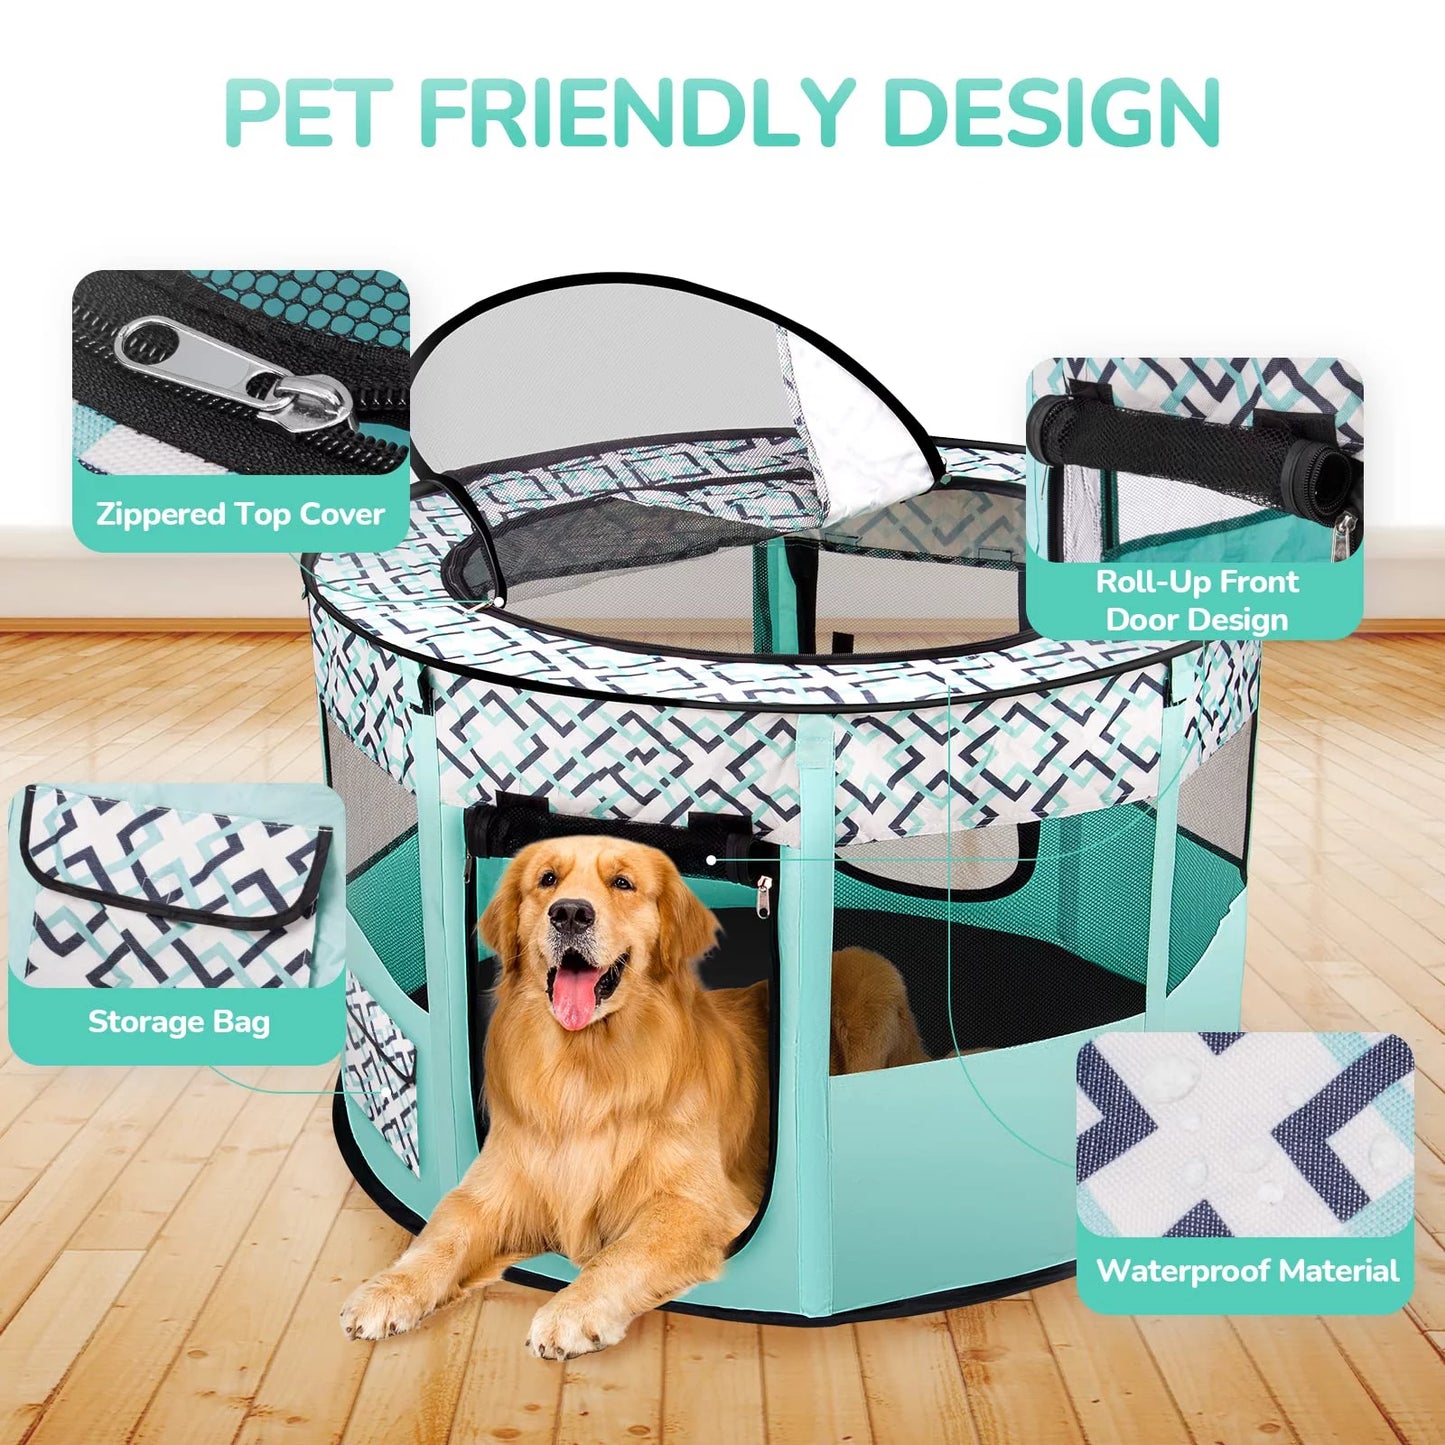 Large Pet Playpen, 44" Diameter 24" Height Dog Playpen, Heavy Duty Portable Exercise Pen Tent for Dog, Cat, Rabbit, Foldable Indoor Outdoor Travel Use, Come with Carrying Case